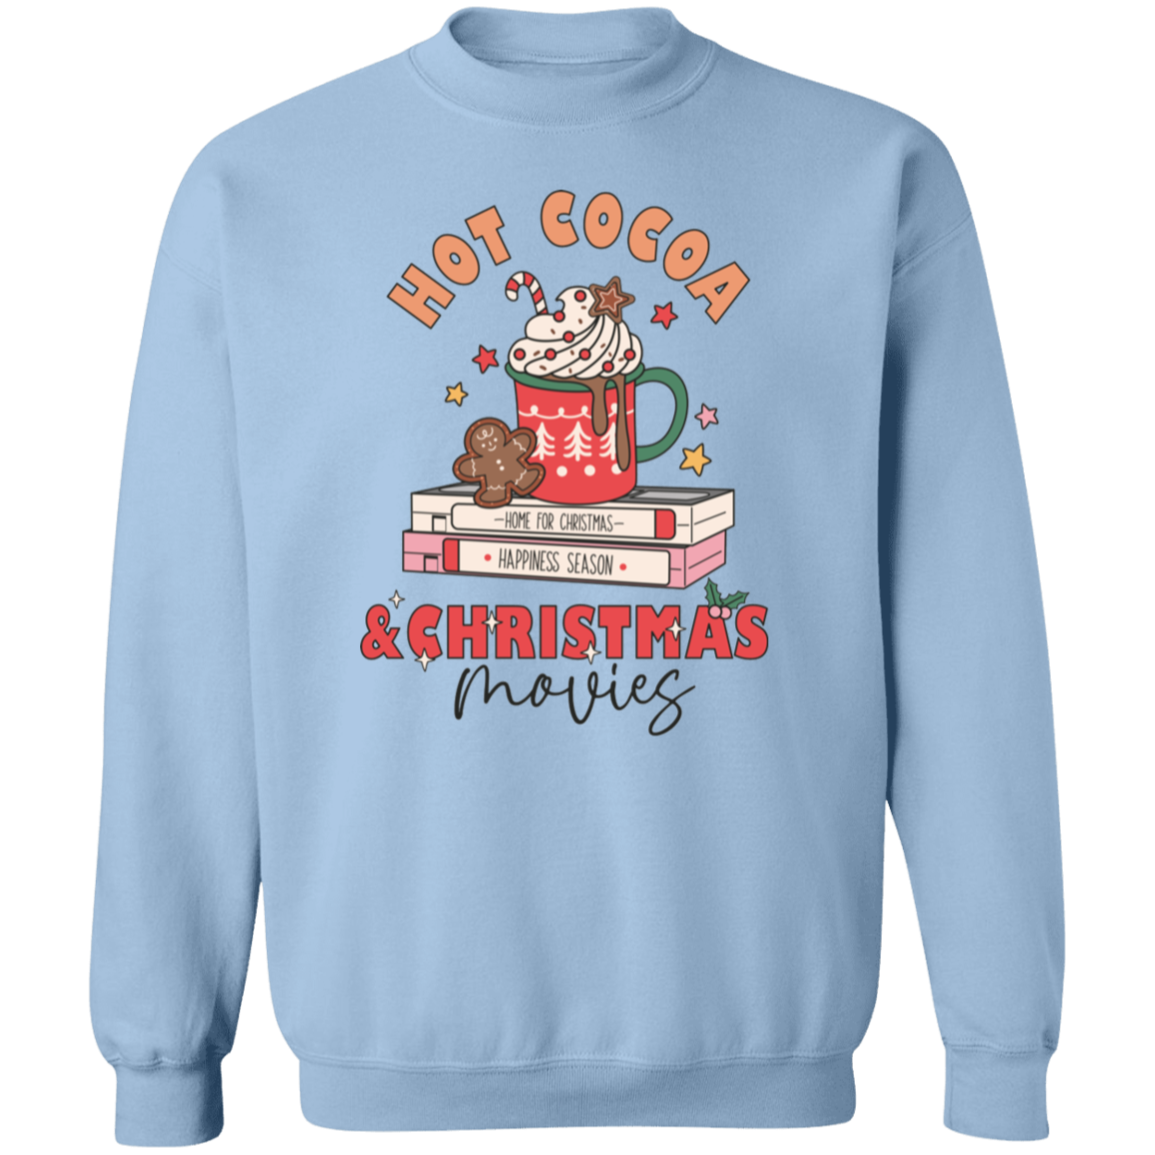 Hot Cocoa & Christmas Movies - Unisex Ugly Sweater, Christmas, Winter, Fall